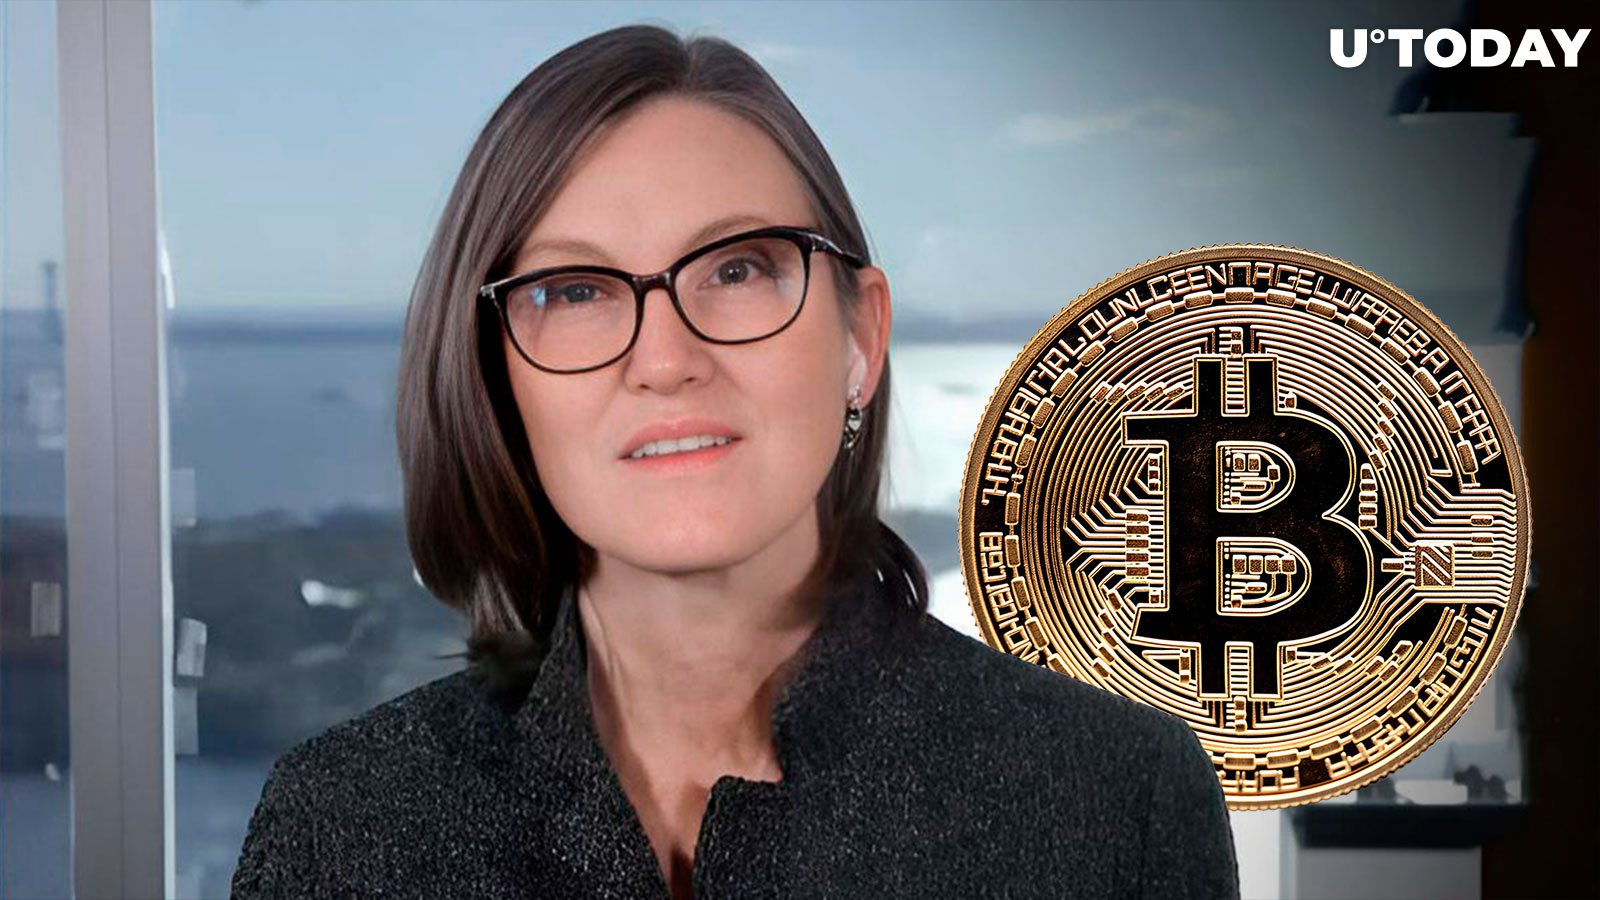 Cathie Wood's Rumored Bitcoin Holdings Reduction Sparks Market Speculation